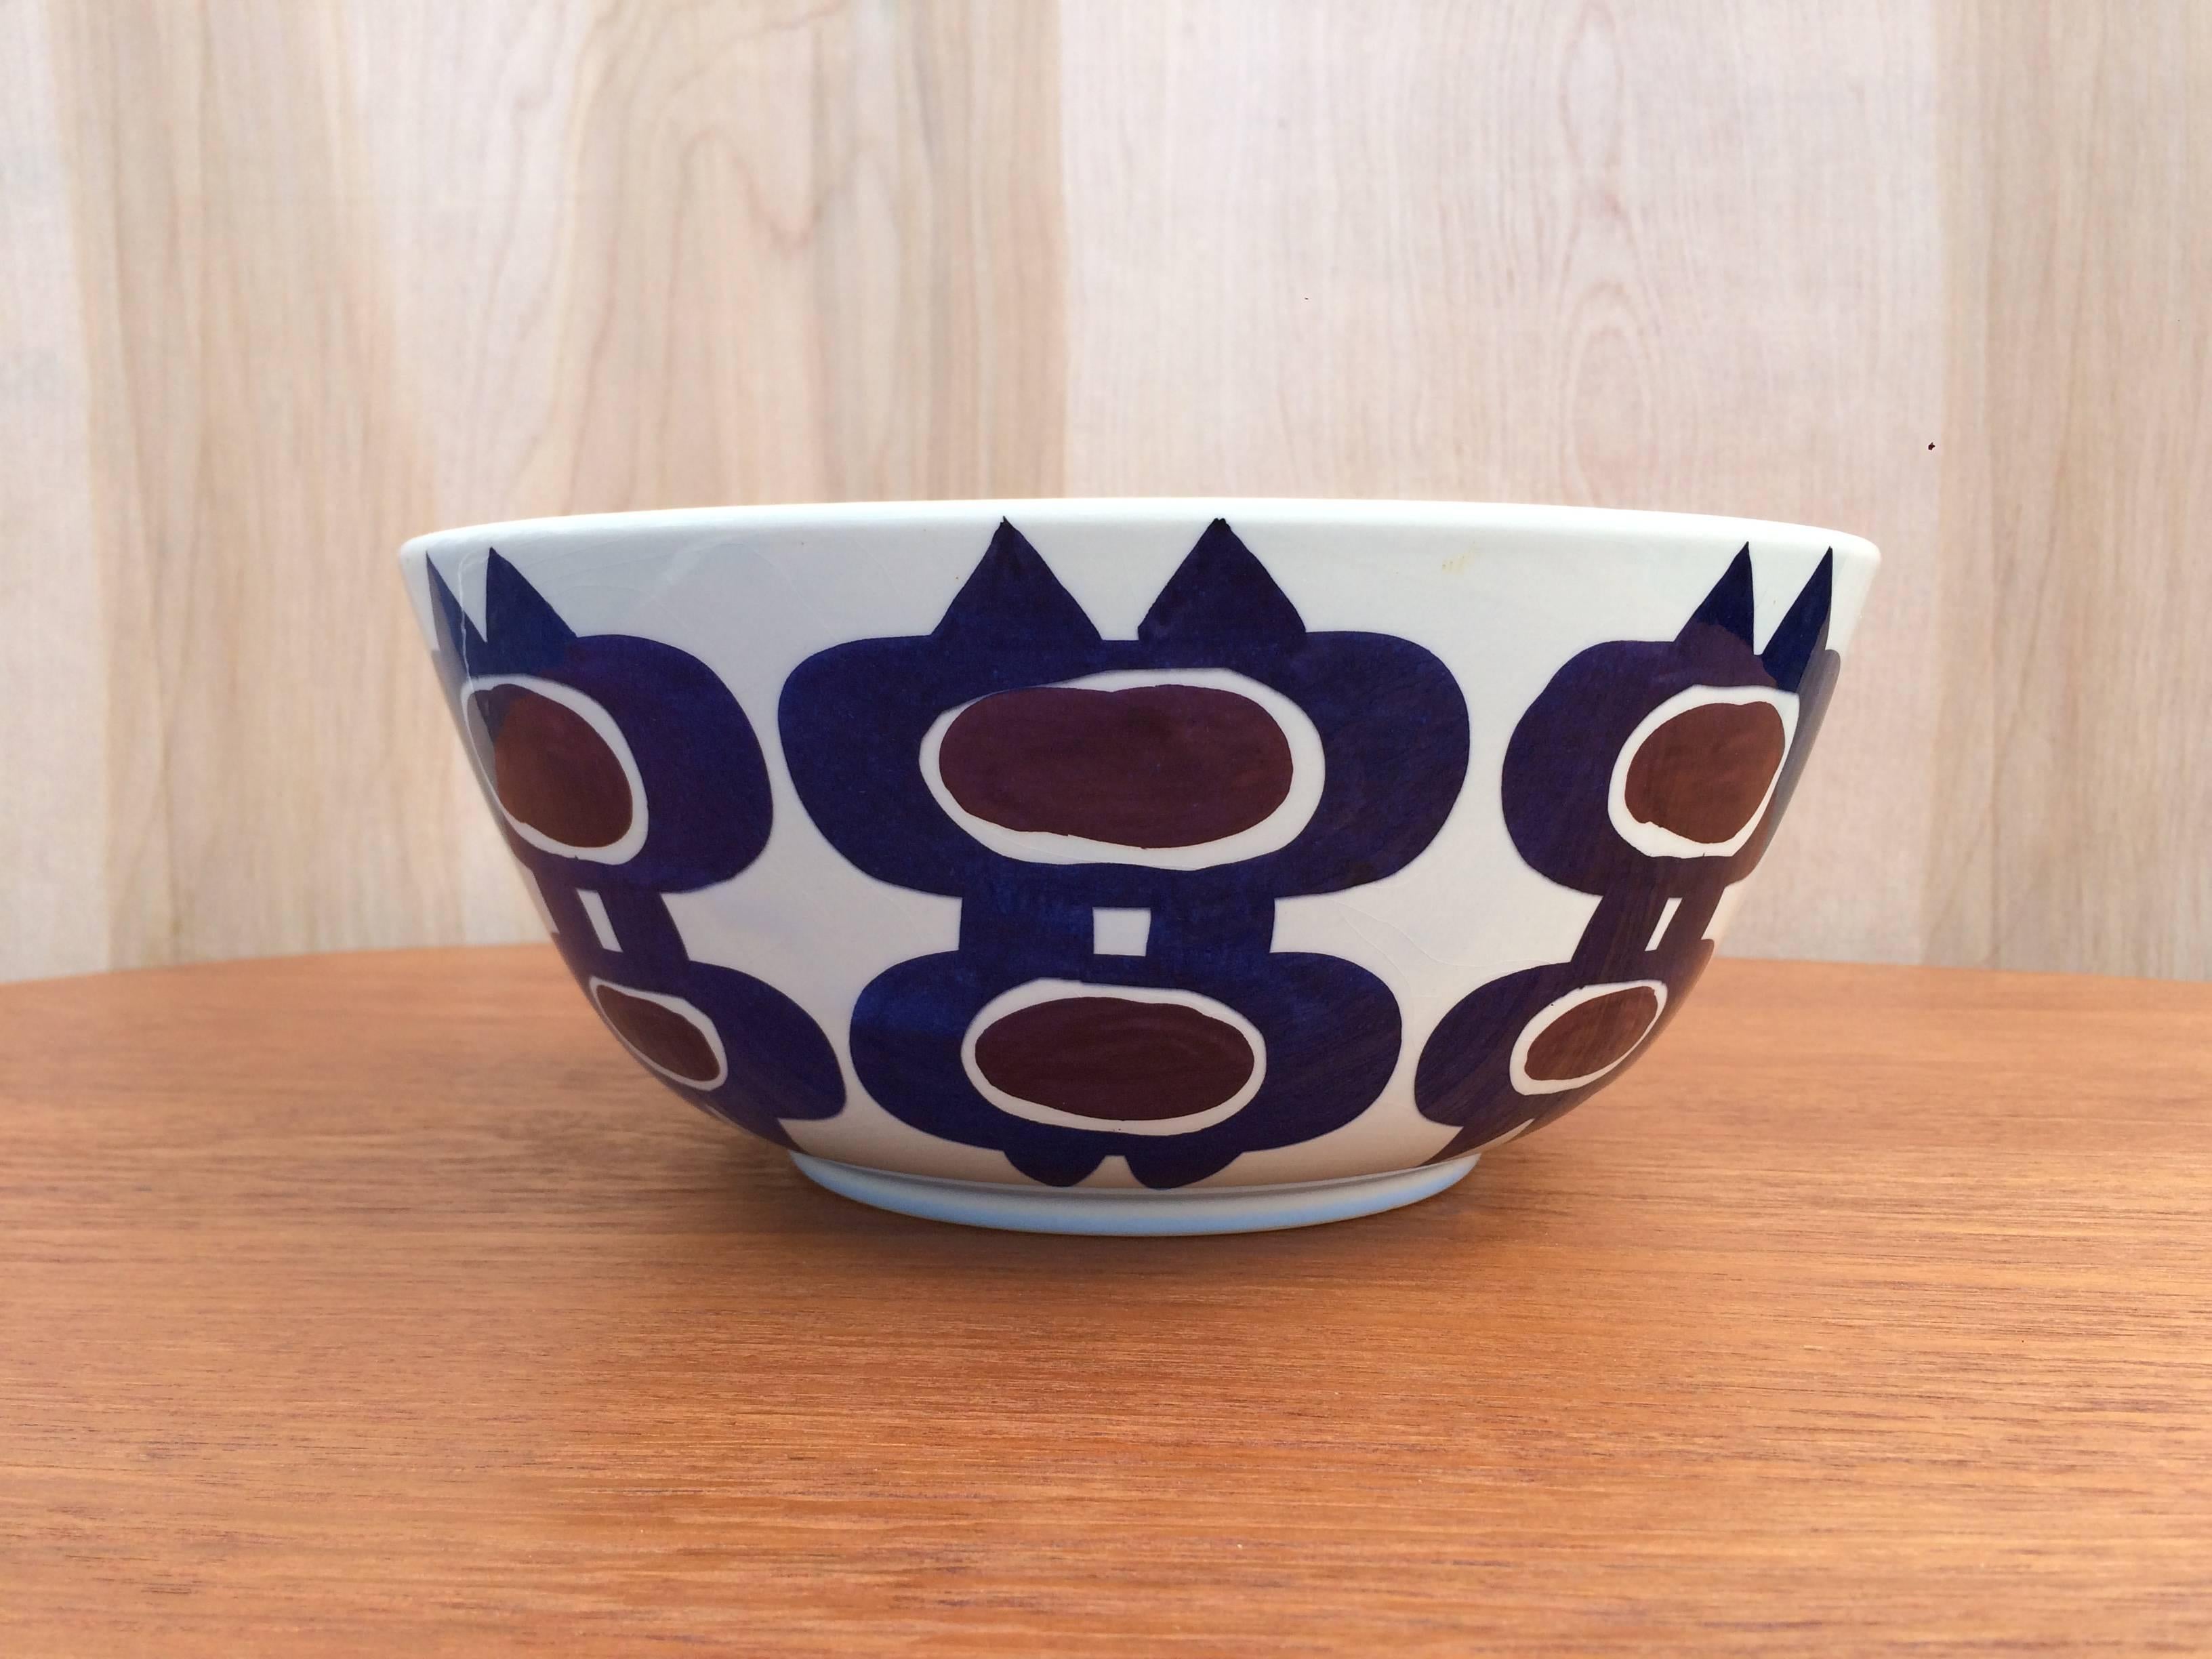 Beautiful Inge-Lisa Koefoed bowl for Royal Copenhagen. In perfect condition and signed.